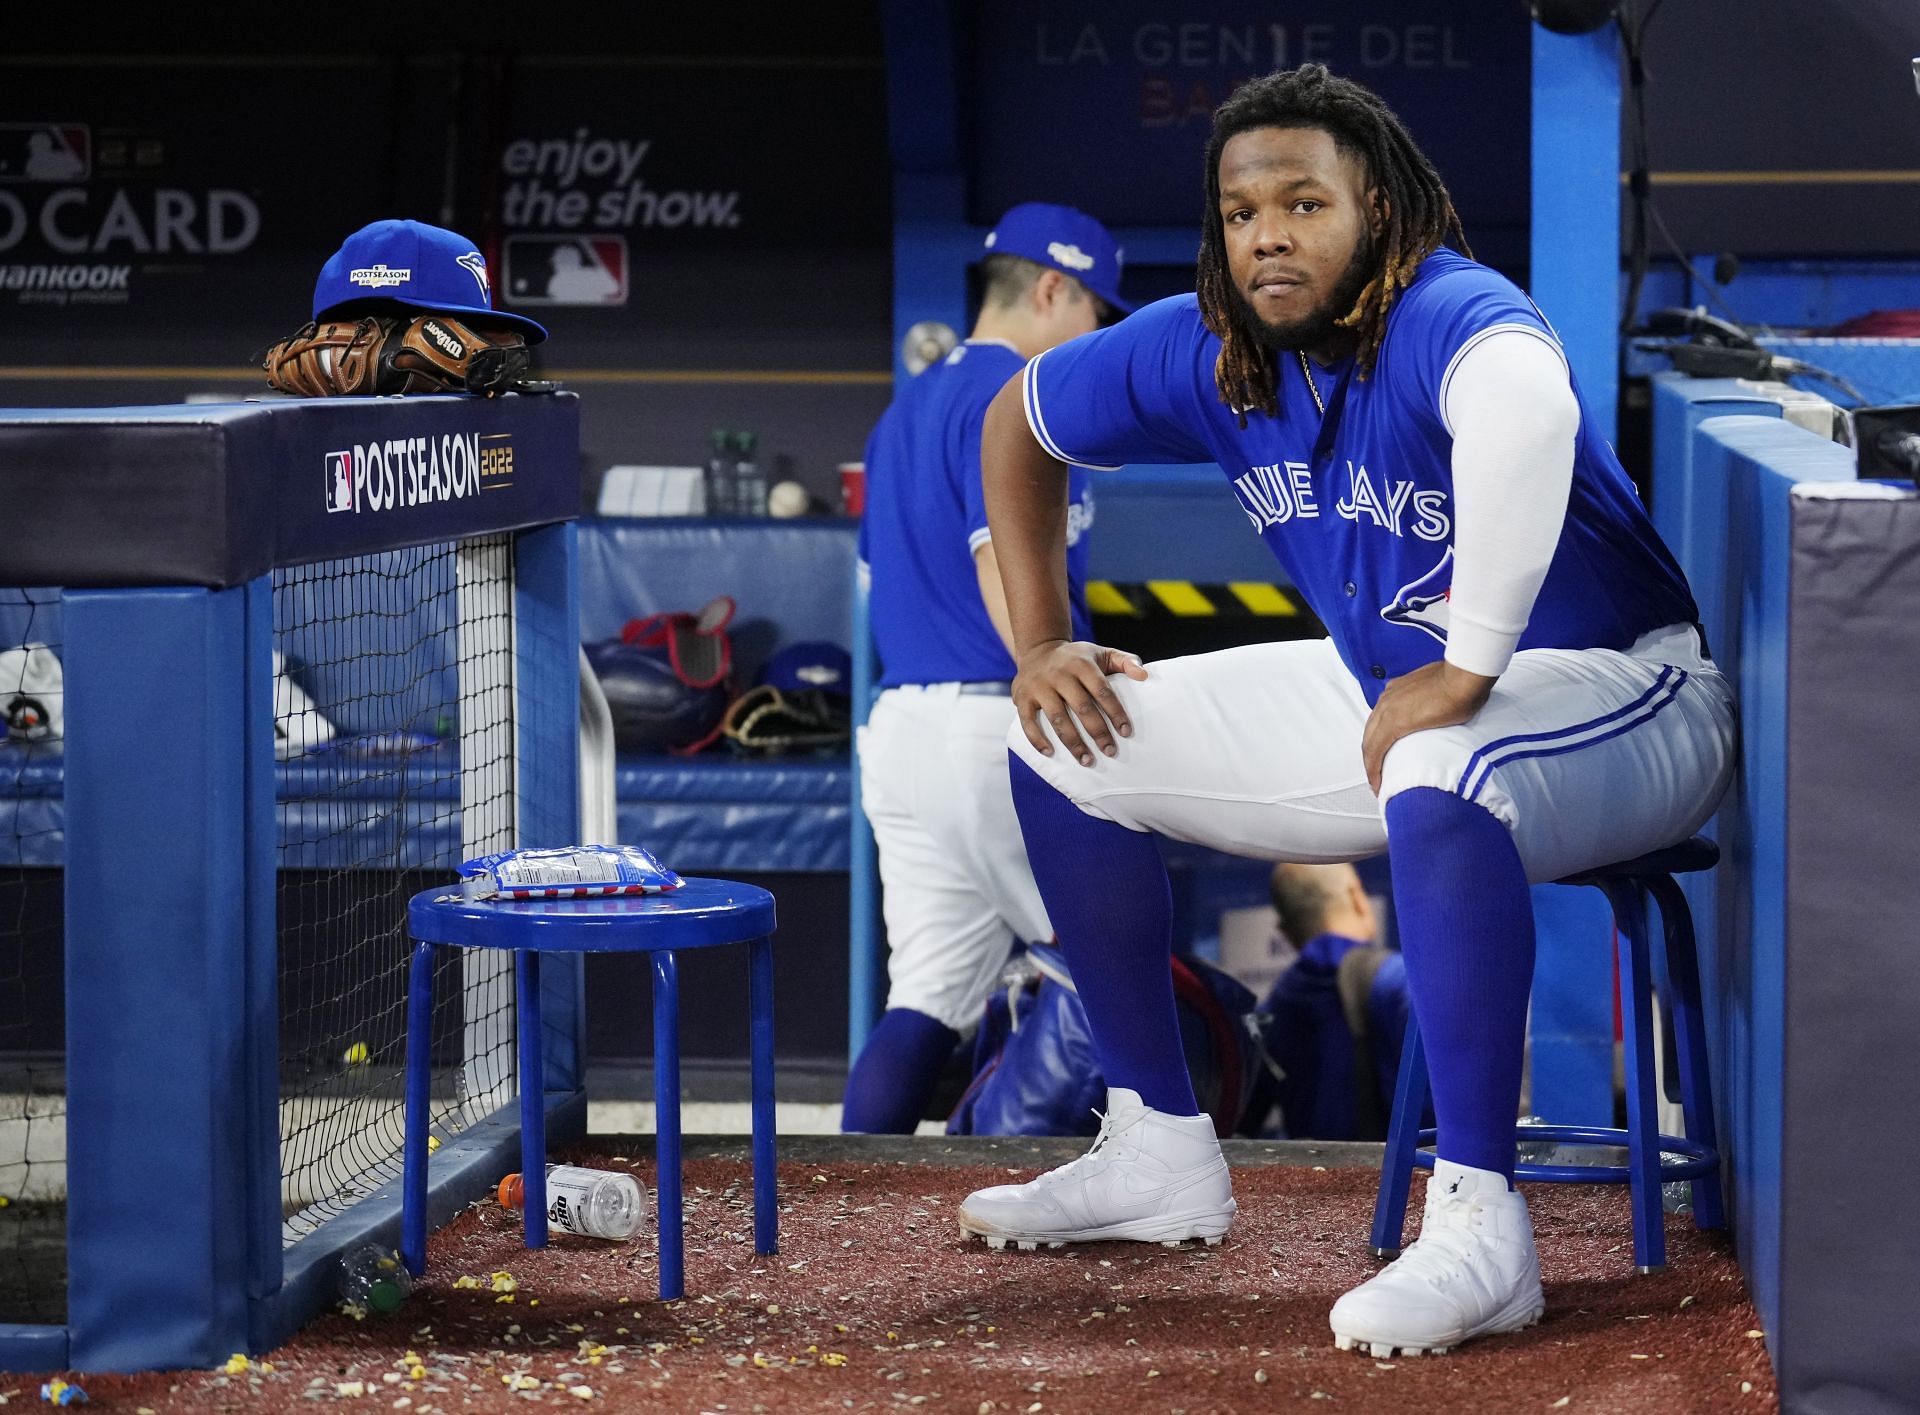 Usually, when I talk to myself, nobody talks back” - Toronto Blue Jays  pitcher Alek Manoah entertains MLB fans worldwide with his commentary while  pitching in MLB All-Star Game